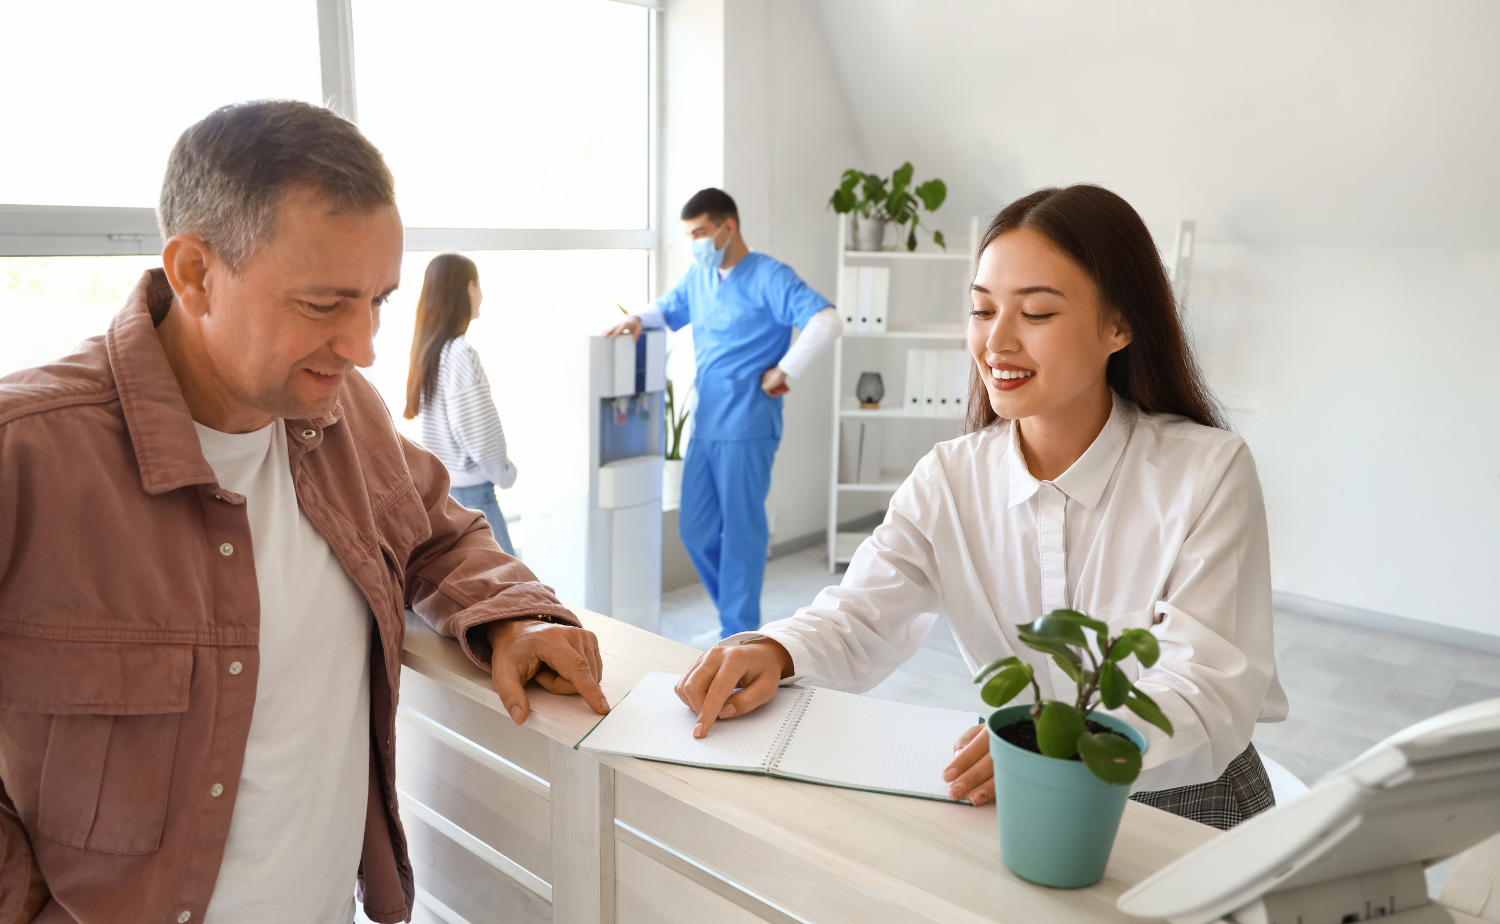  A cheerful receptionist assists a patient at a reception desk, with a healthcare professional and another patient in the background, creating a welcoming and efficient healthcare environment.